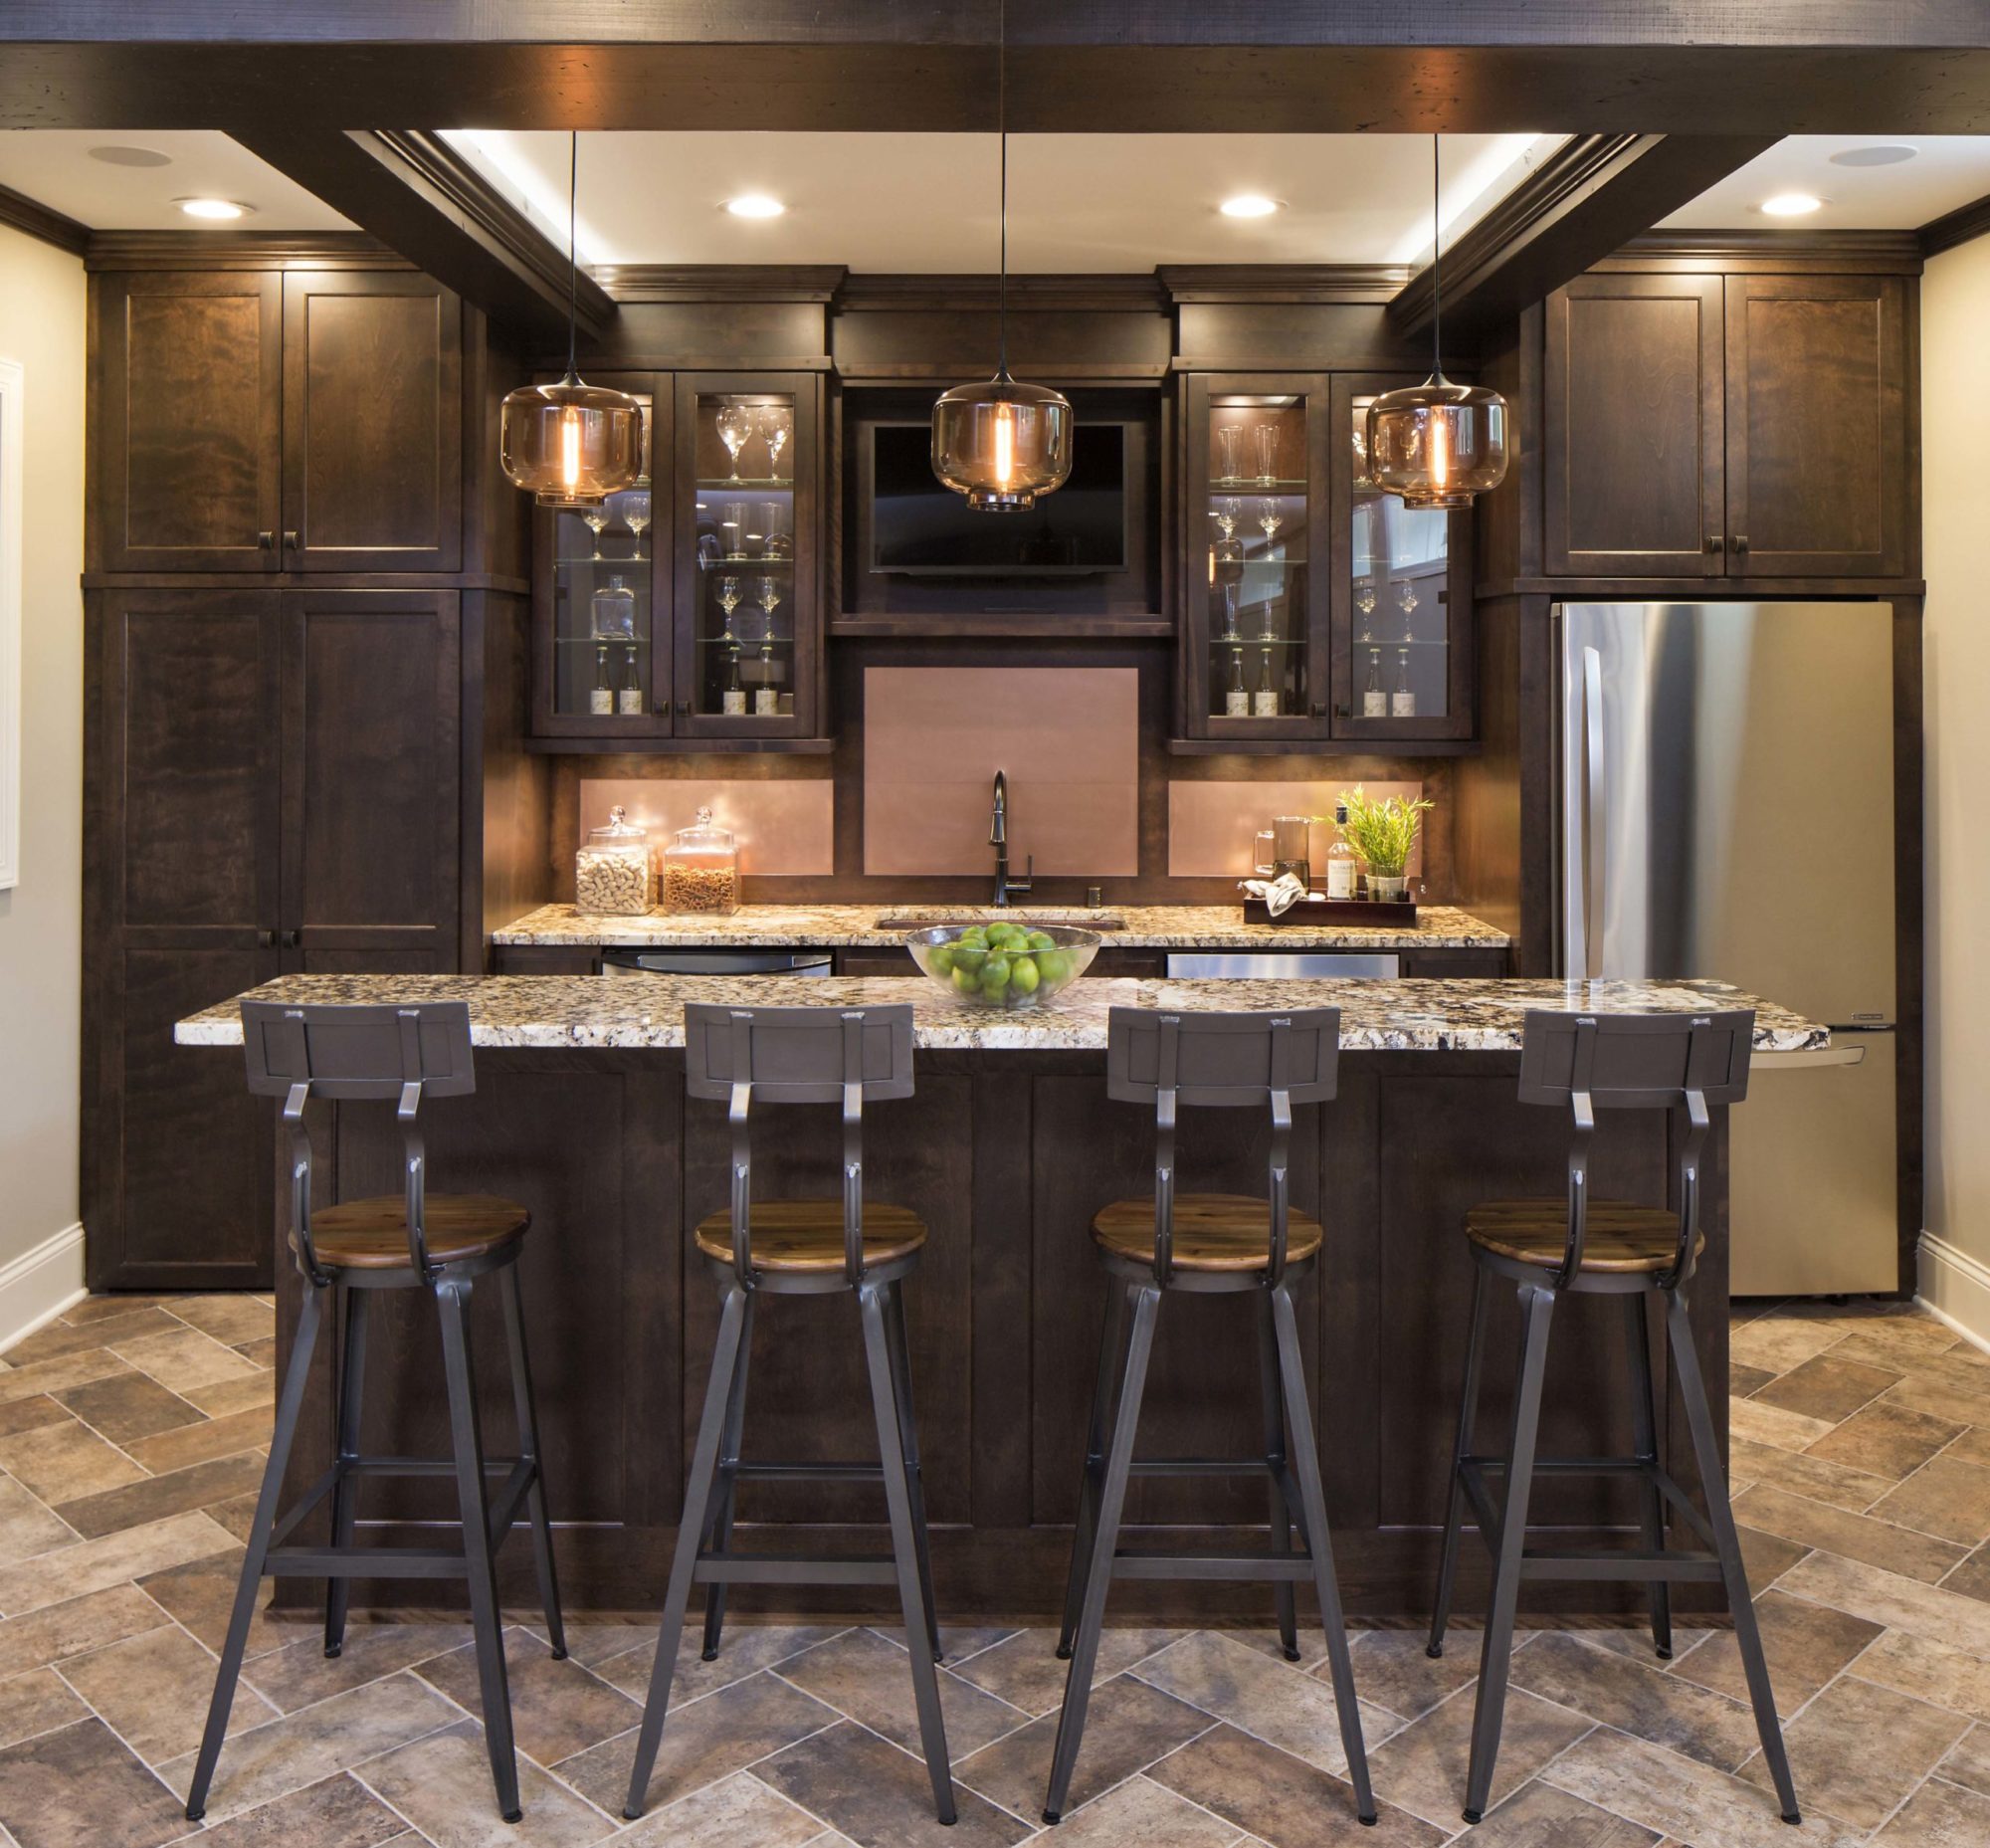 An Edina remodel kitchen with a center island and bar stools.